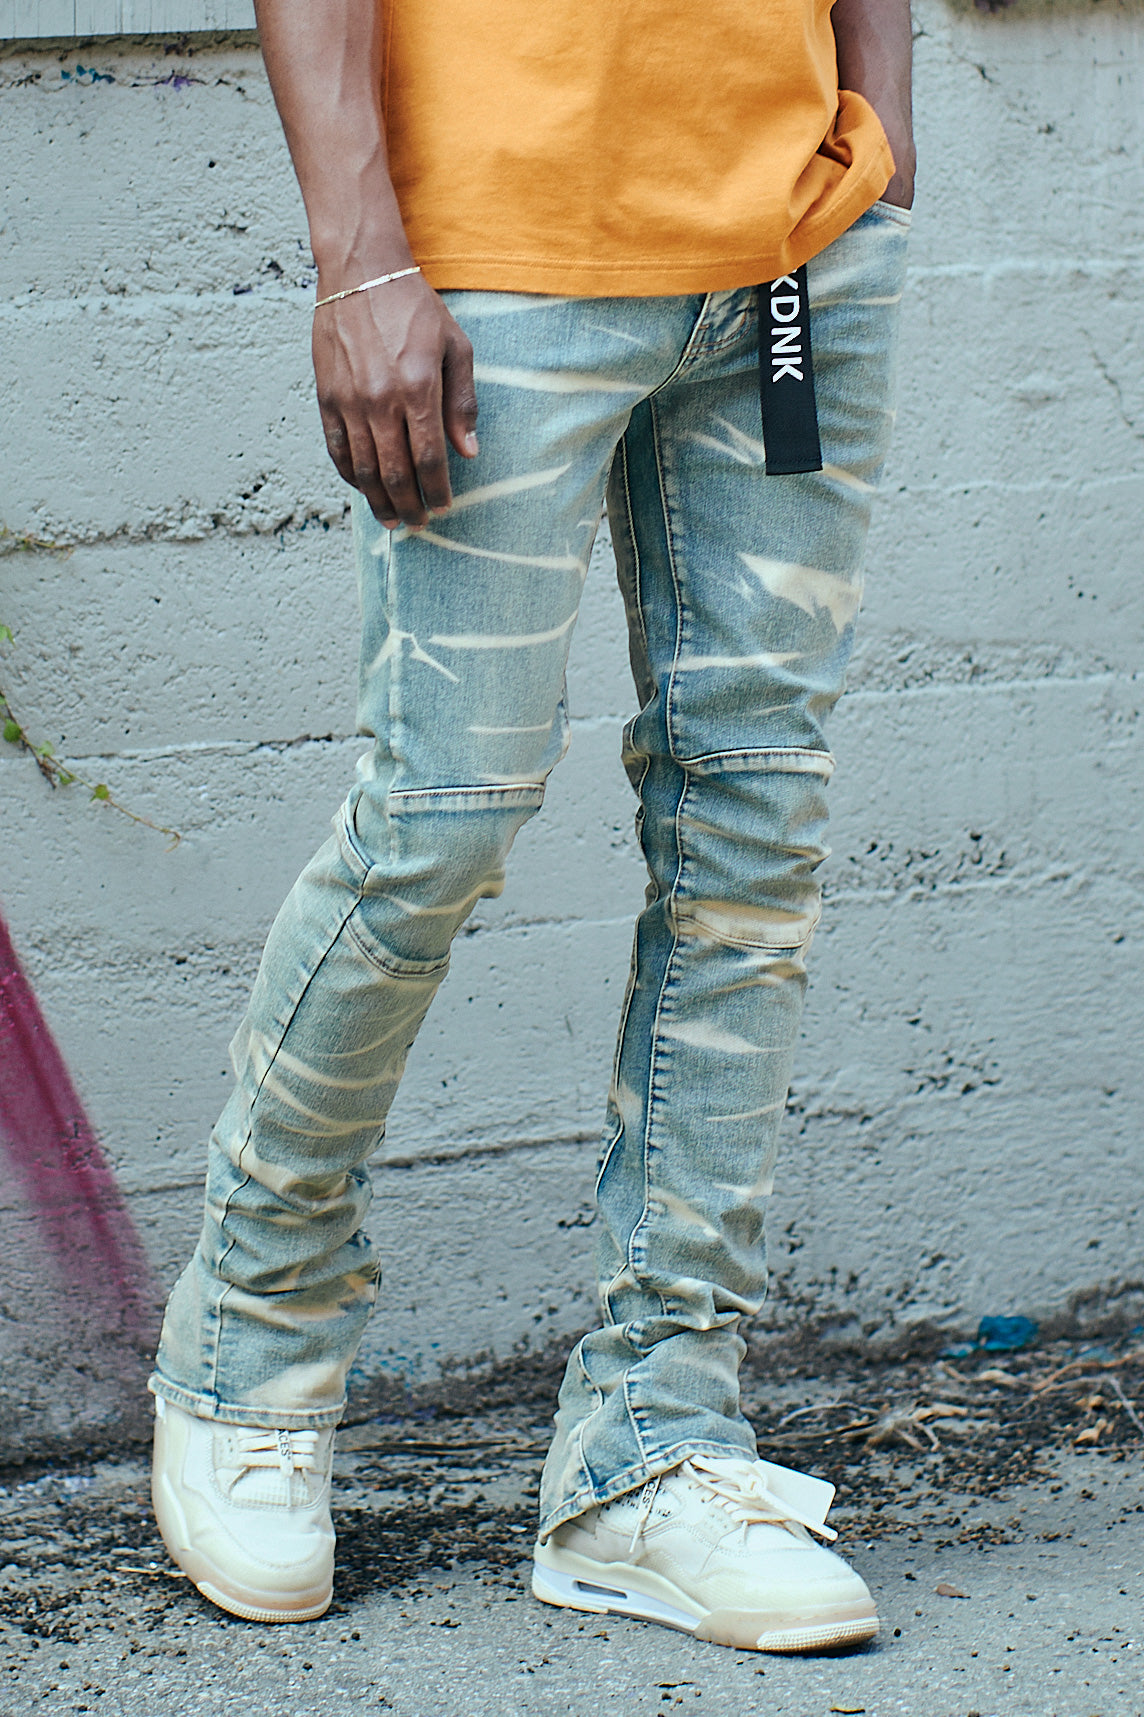 Men's Flared Stacked Jeans - contemporary luxury streetwear - The